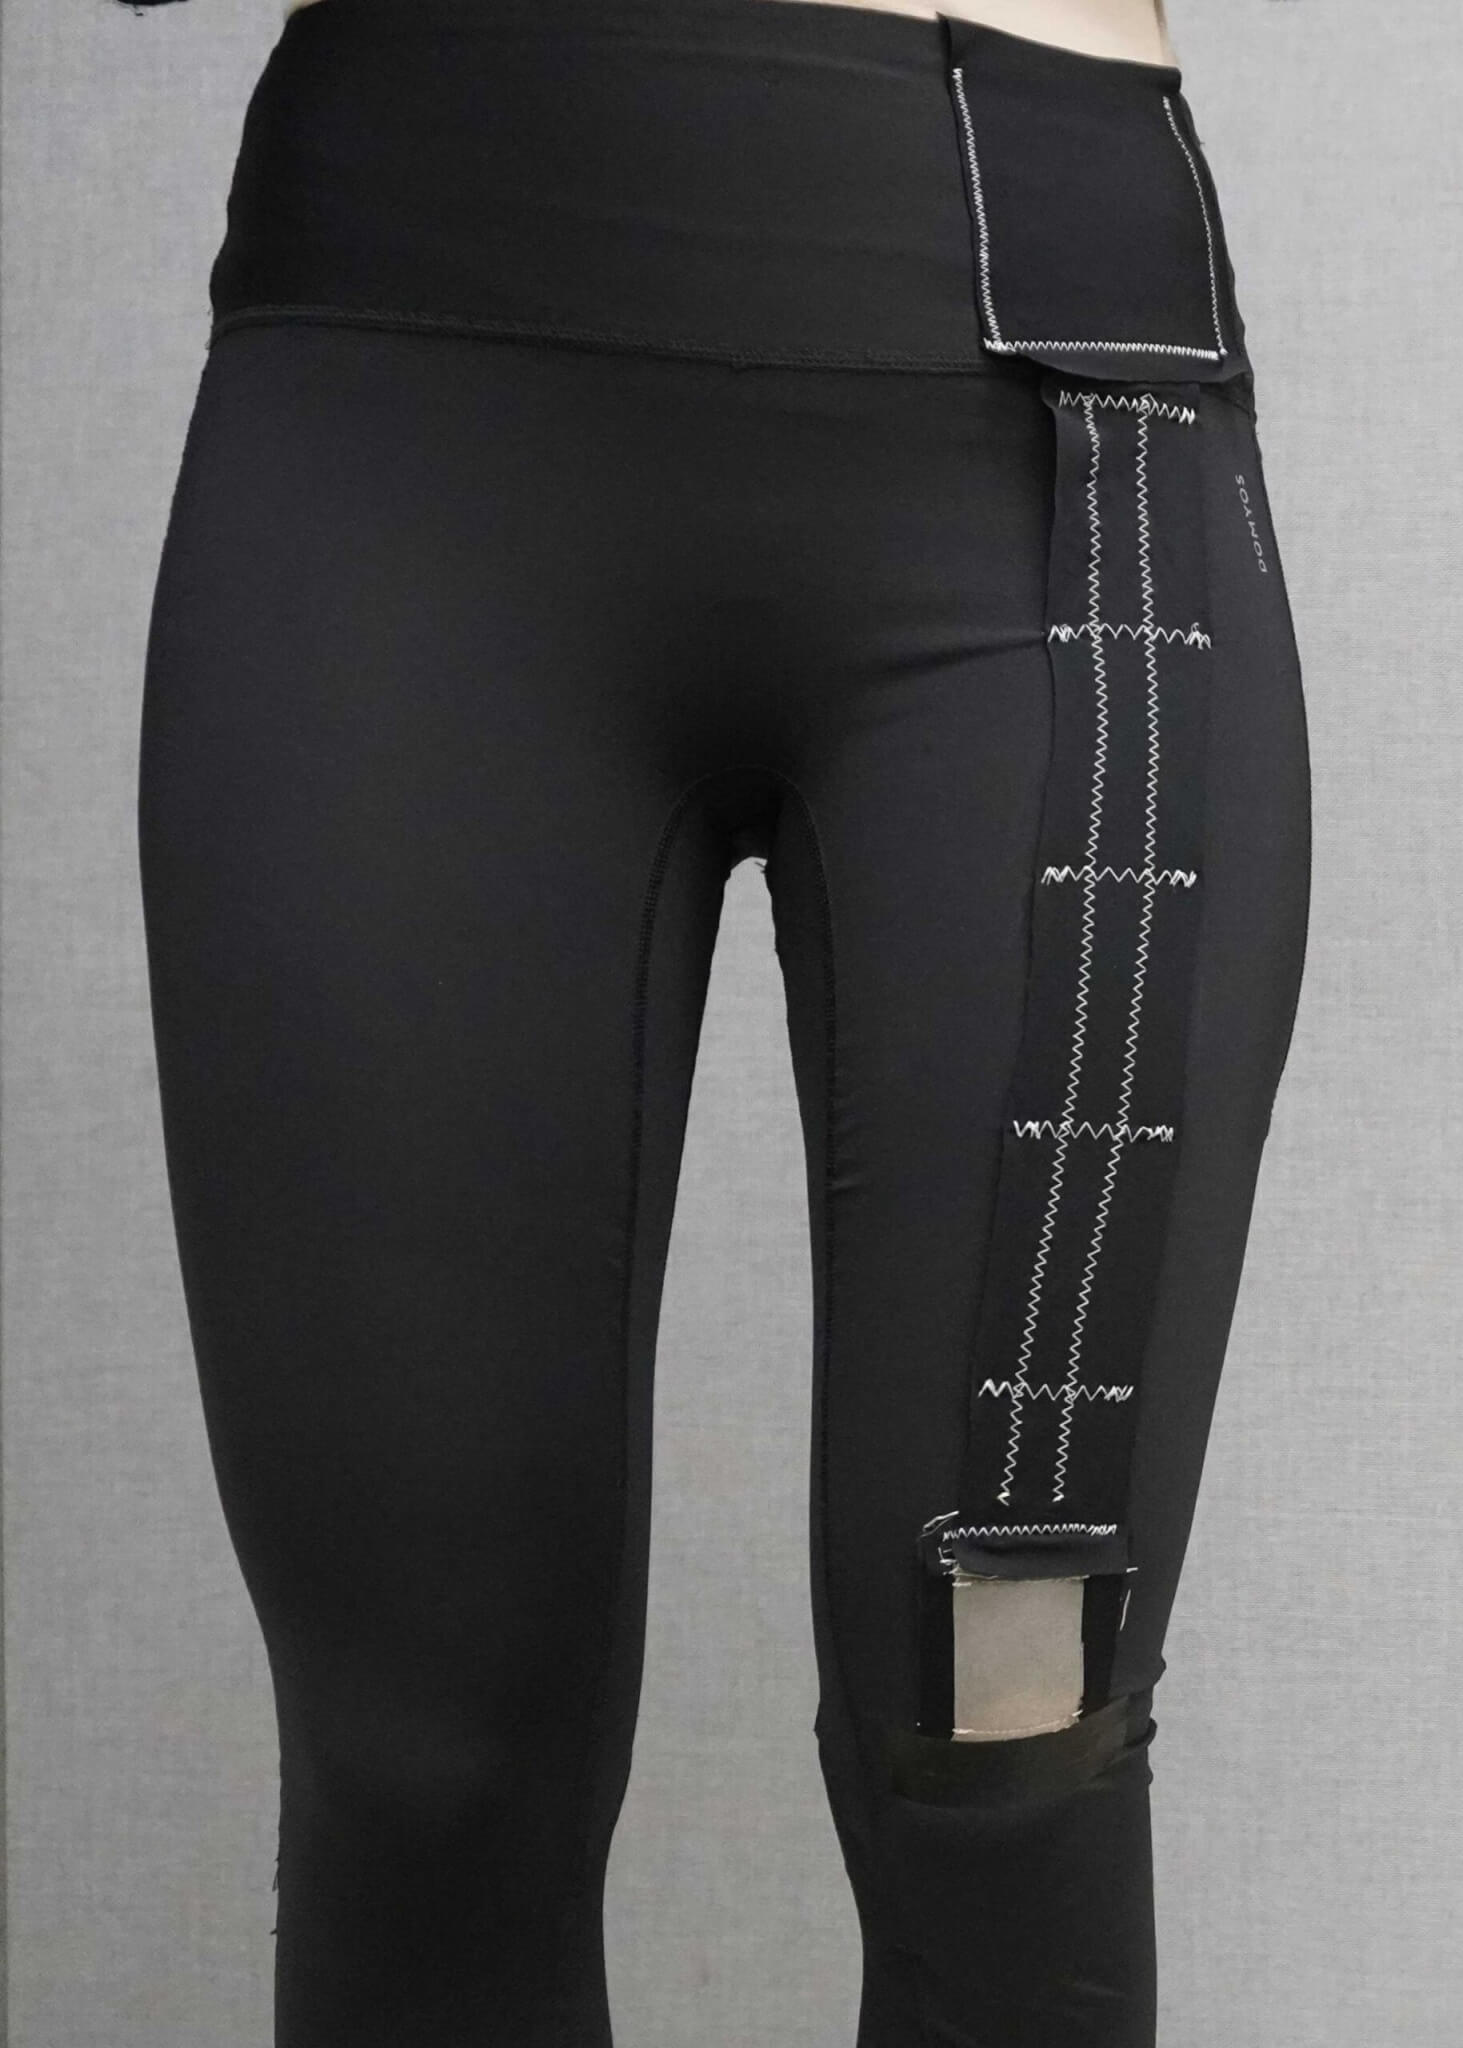 A pair of smart leggings that measure exhaustion.